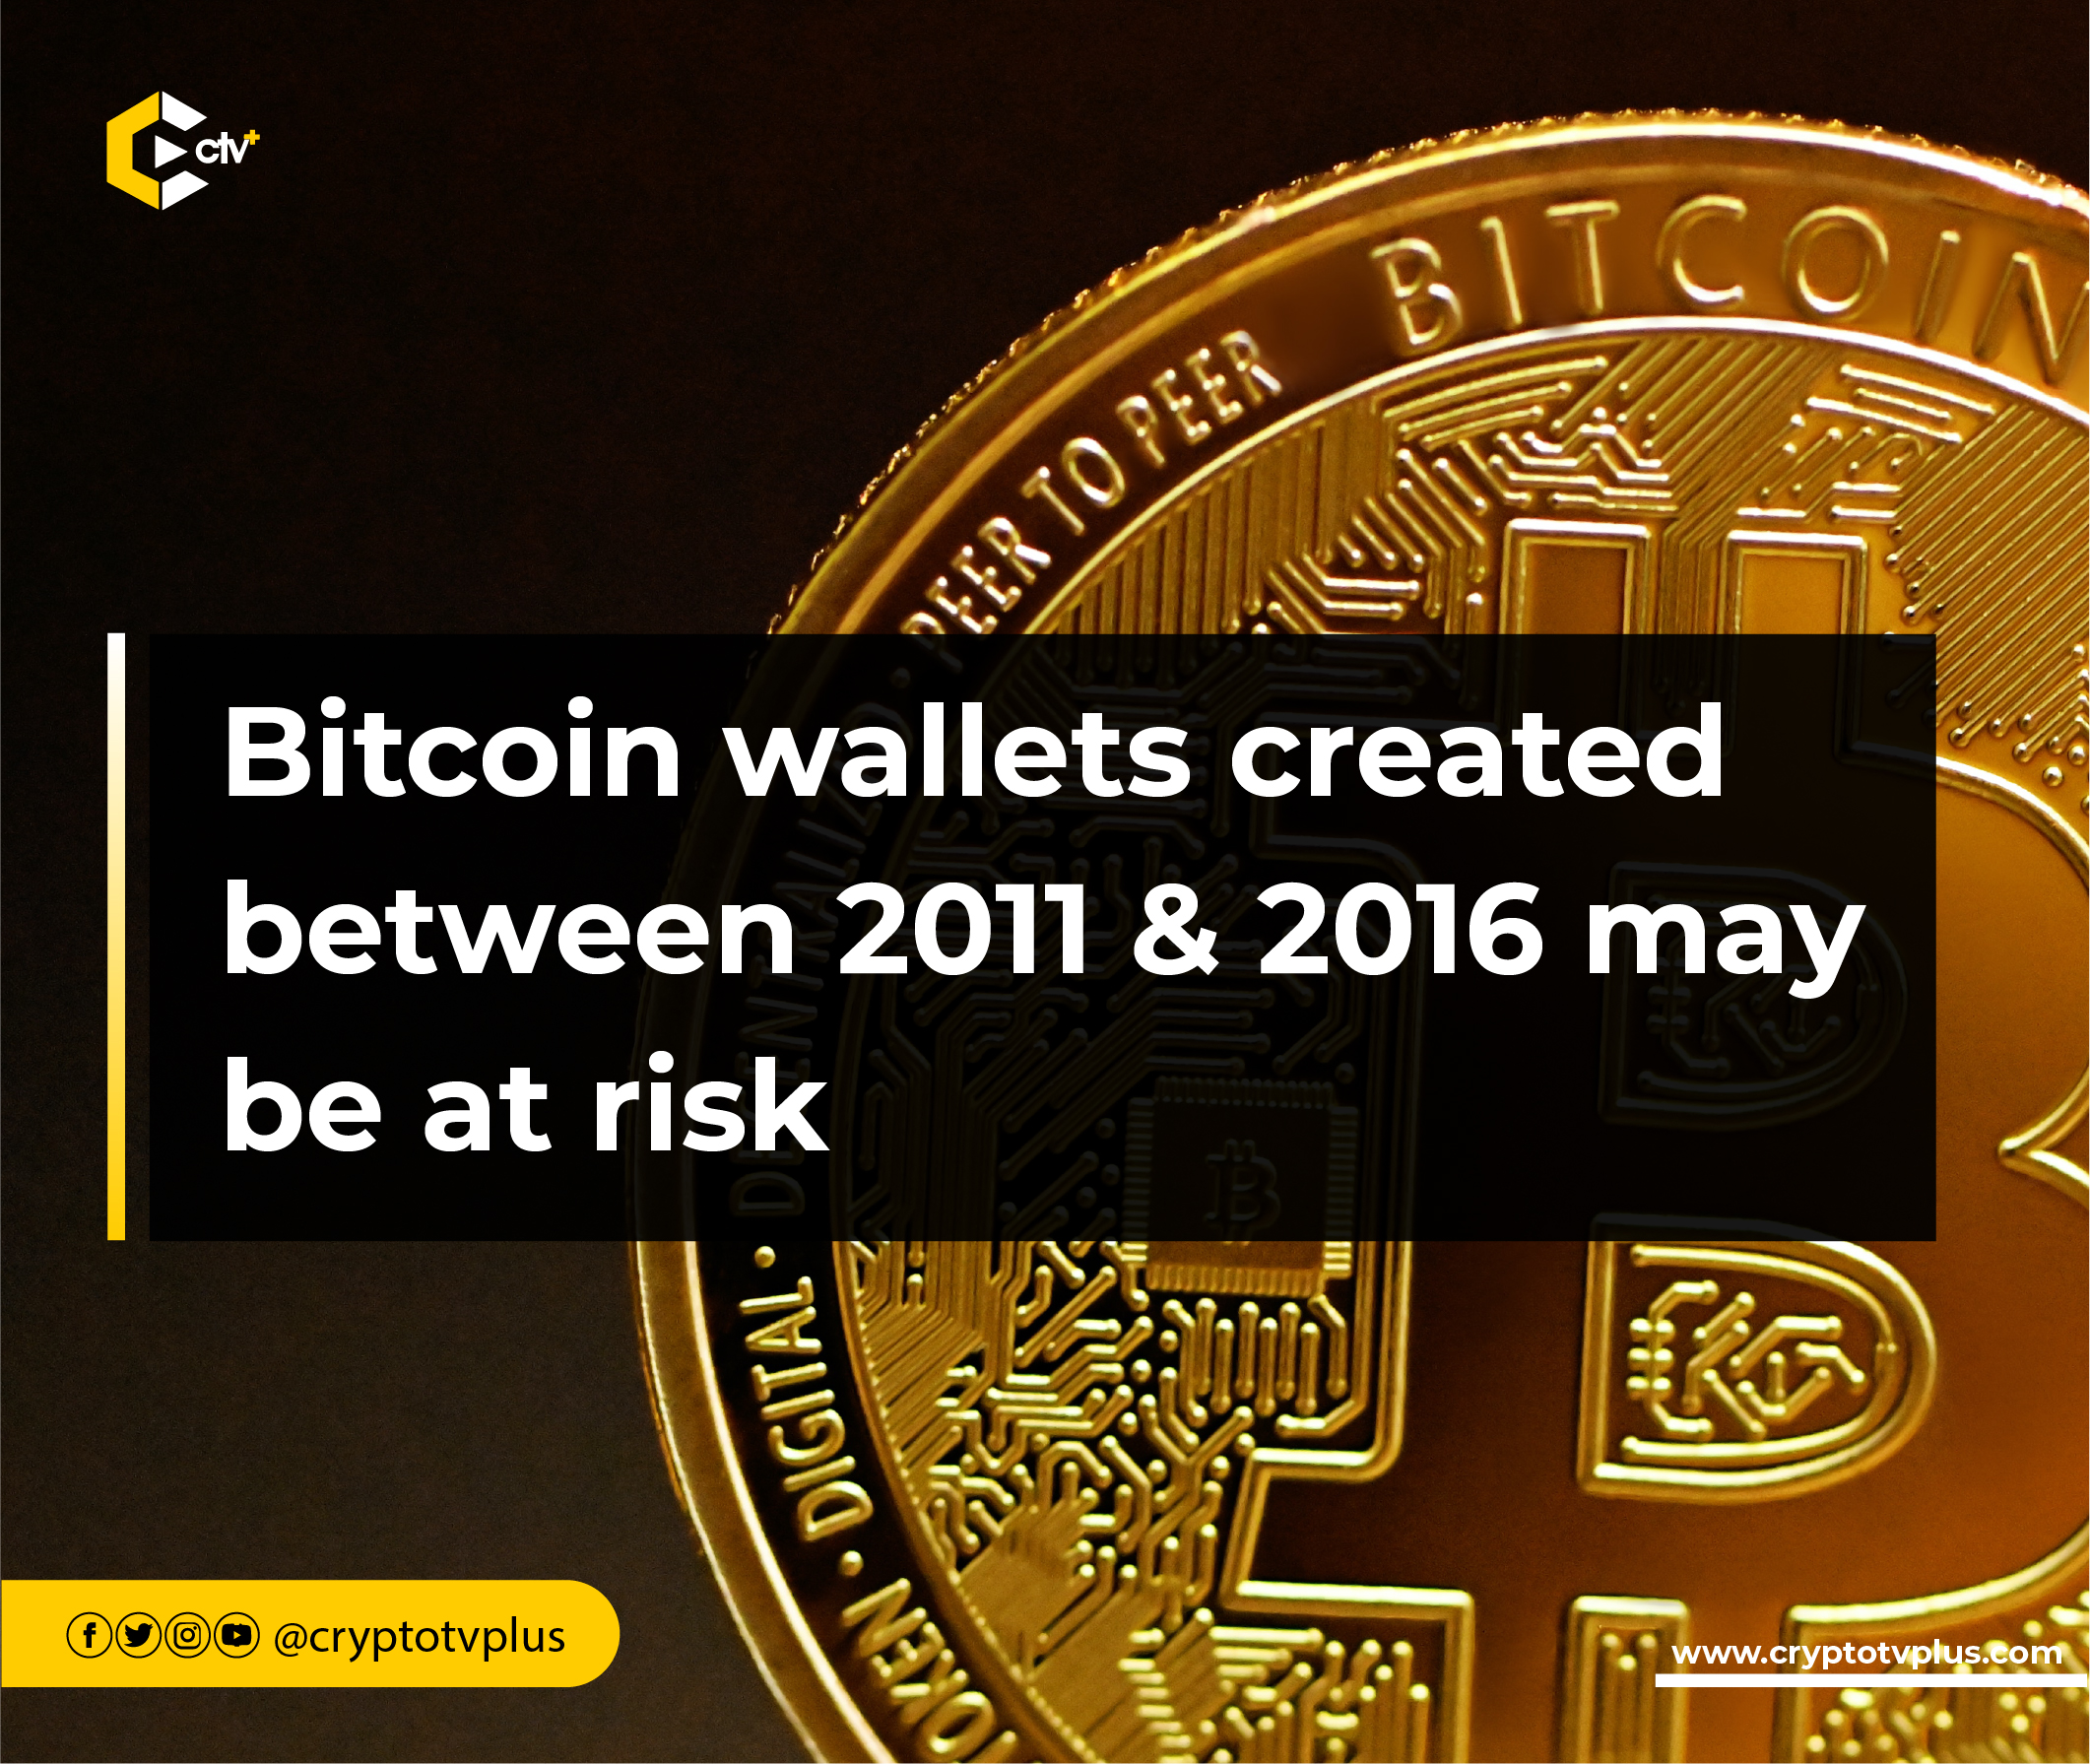 Unciphered reveals "Randstorm" vulnerability in BitcoinJS-based wallets created between 2011 to 2016. Learn about the potential risks and stay safe in the crypto world.